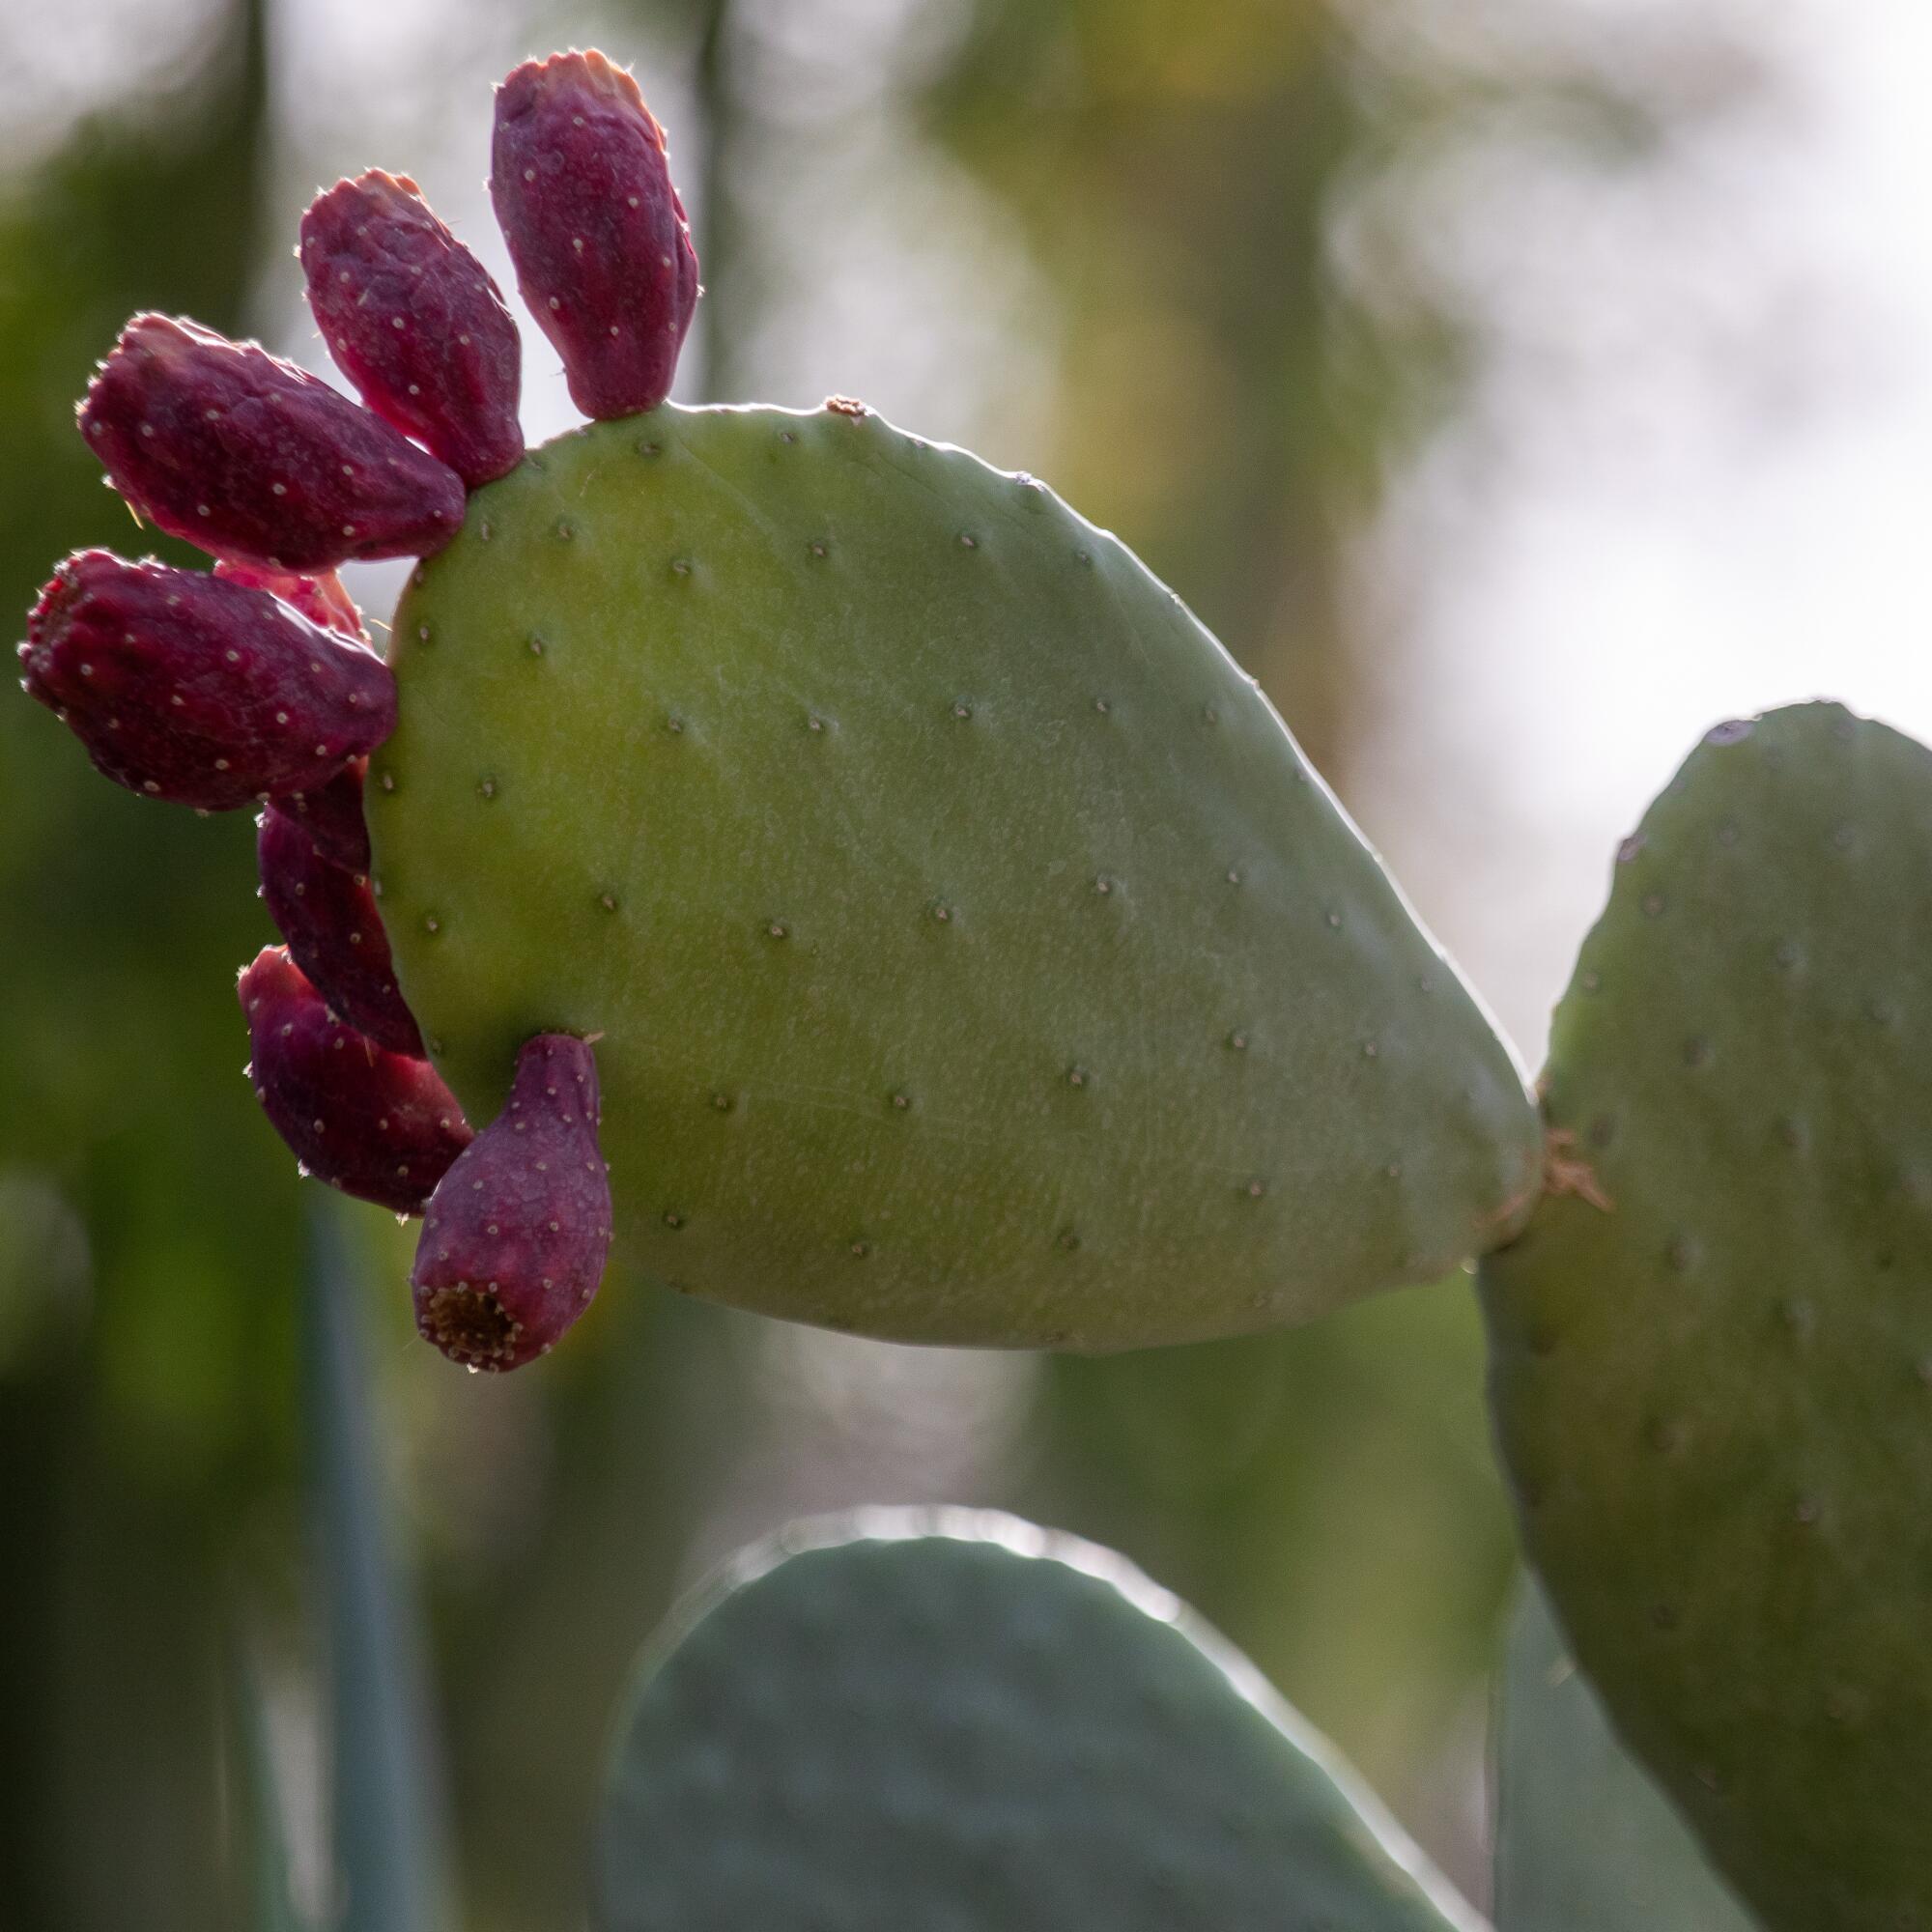 The fruiting paddle of a prickly pear cactus